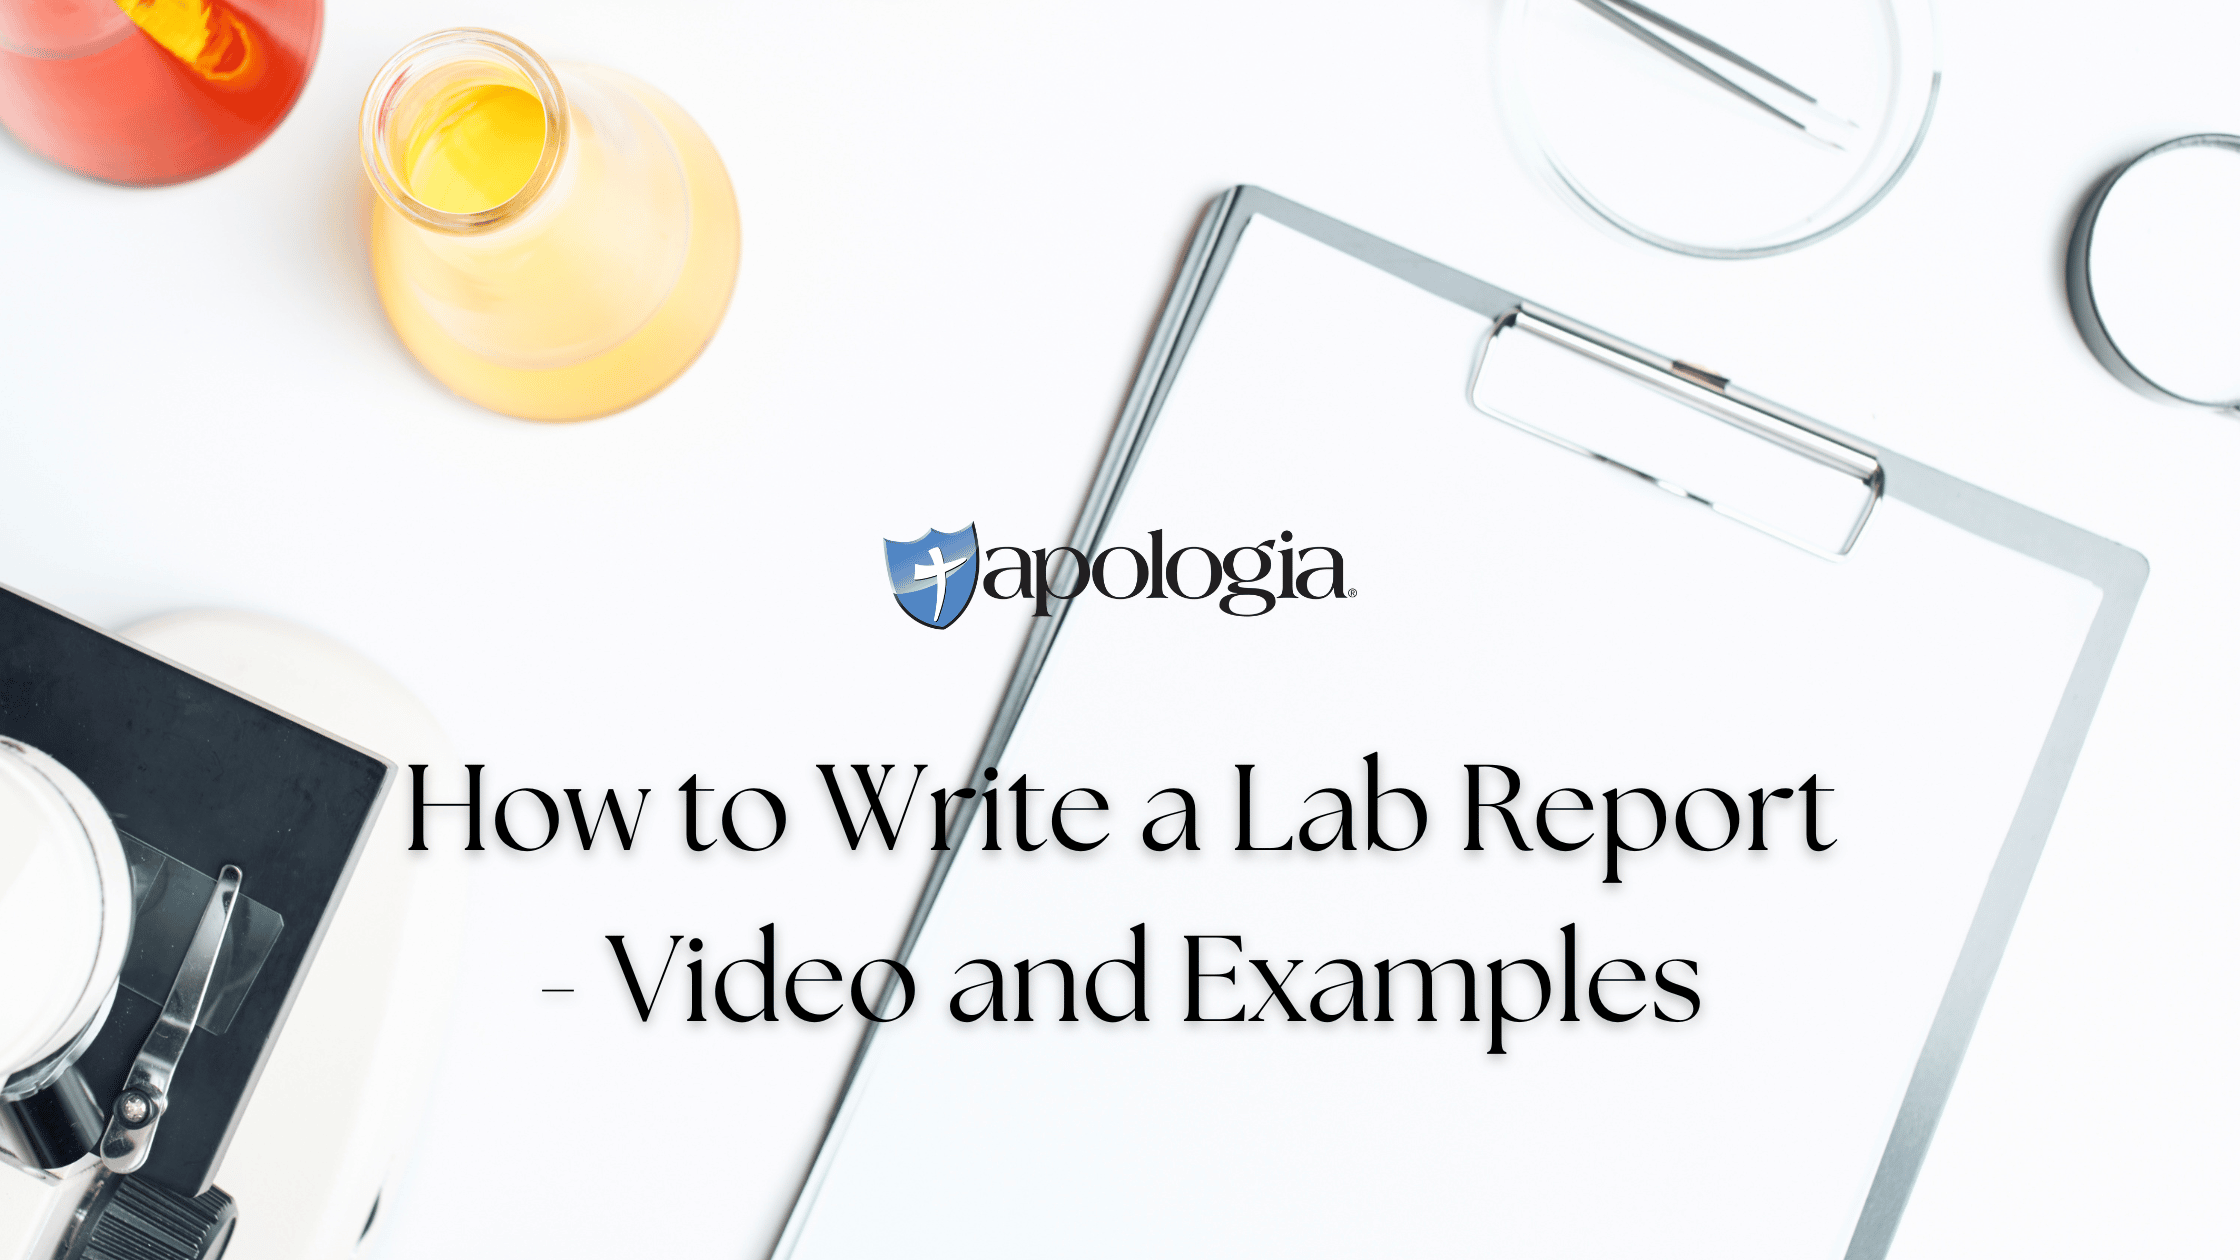 How to Write a Lab Report - Video and Examples